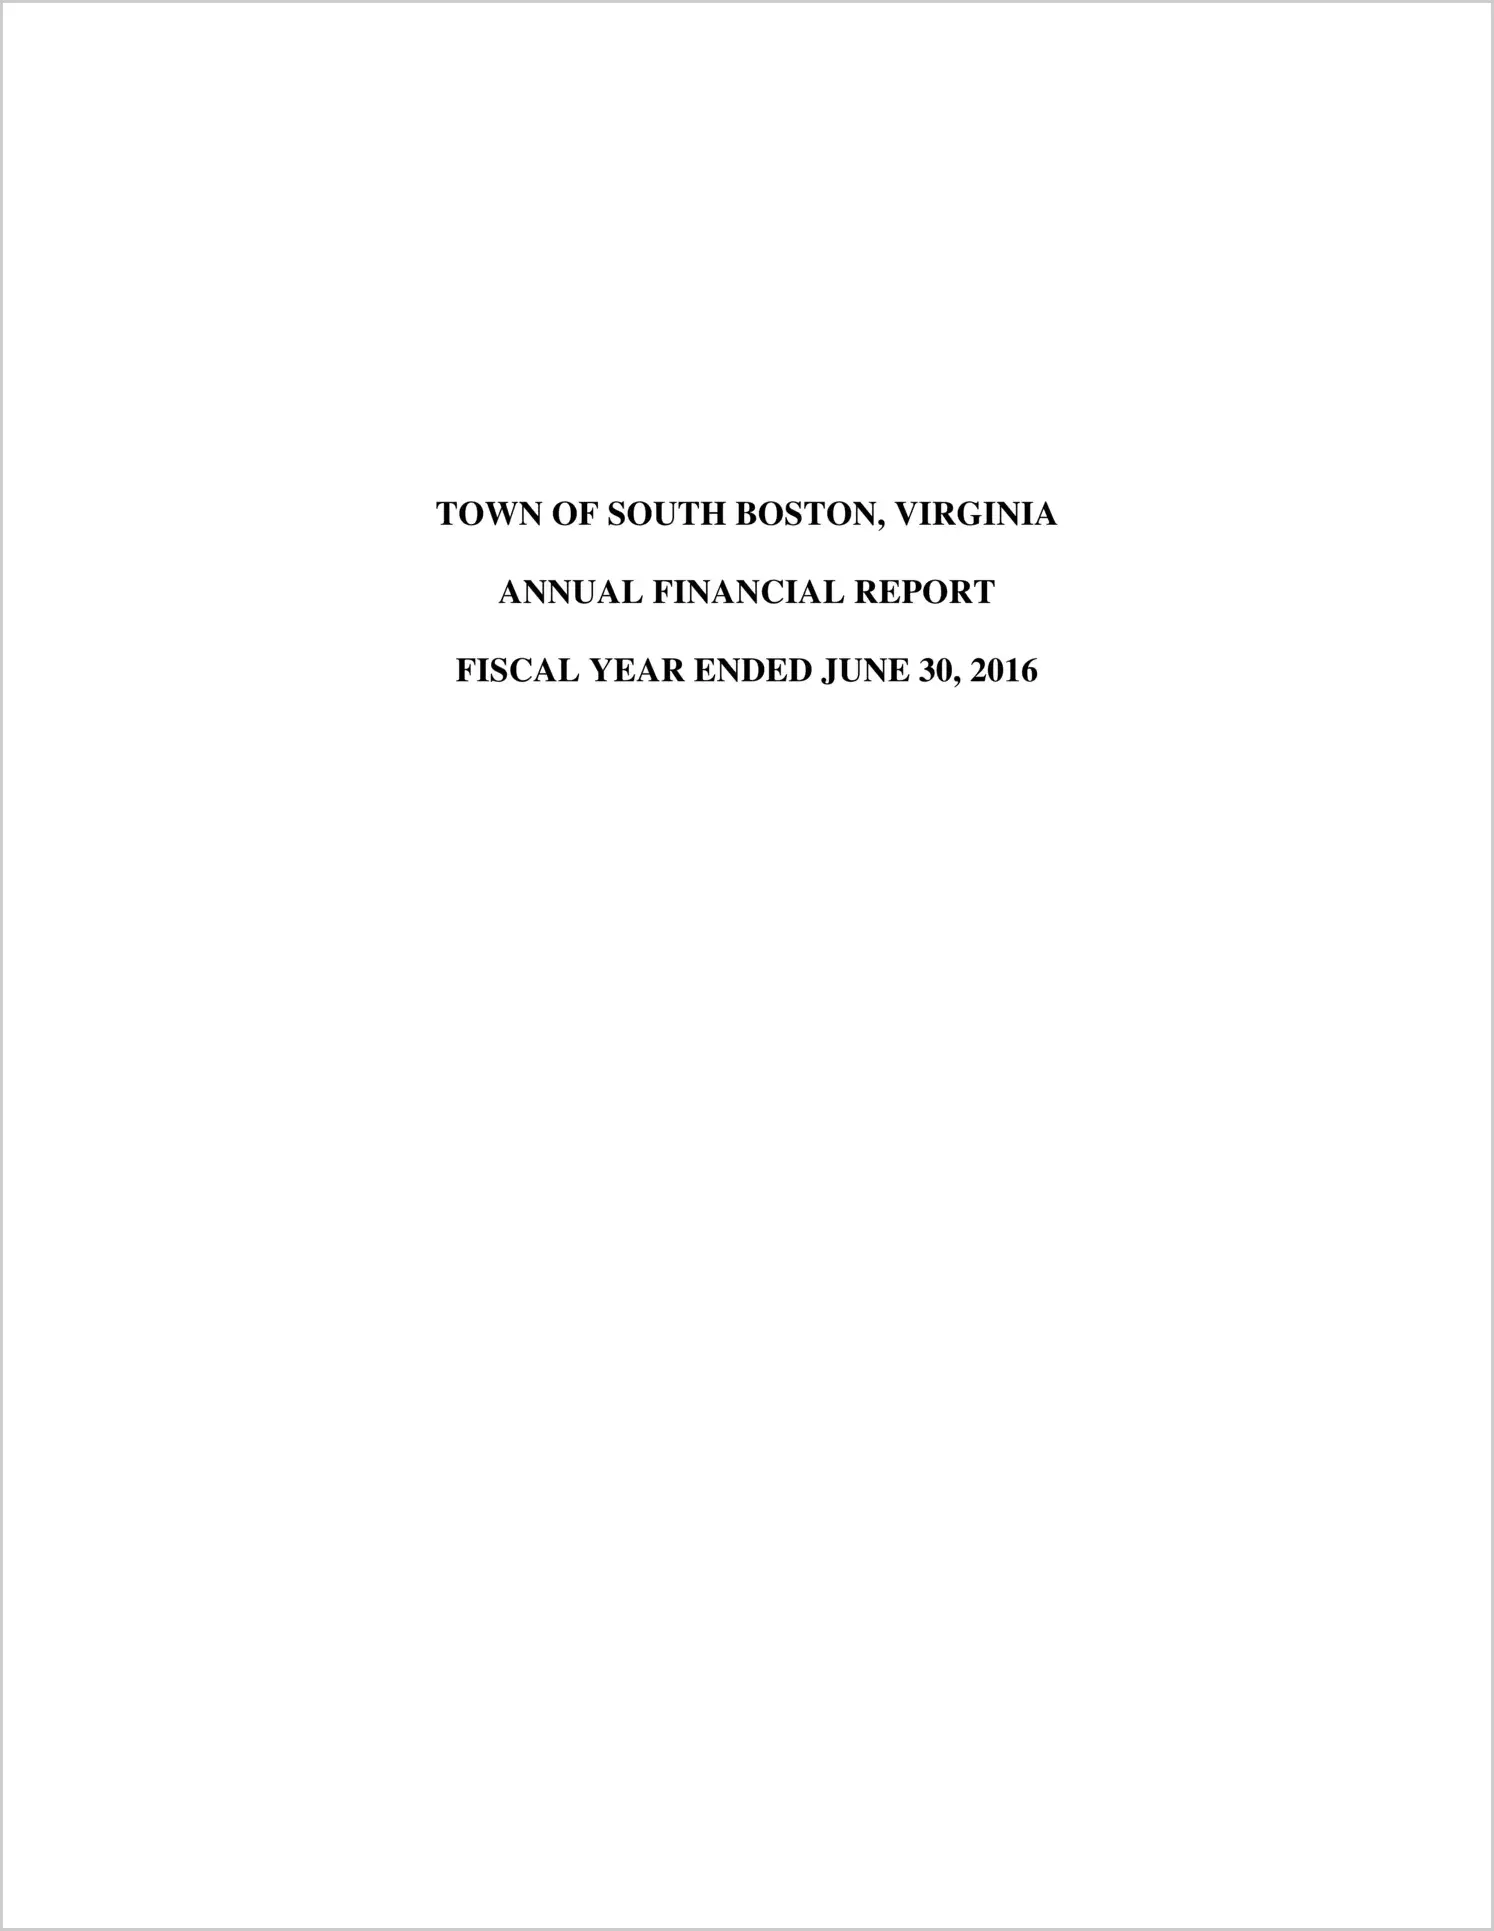 2016 Annual Financial Report for Town of South Boston